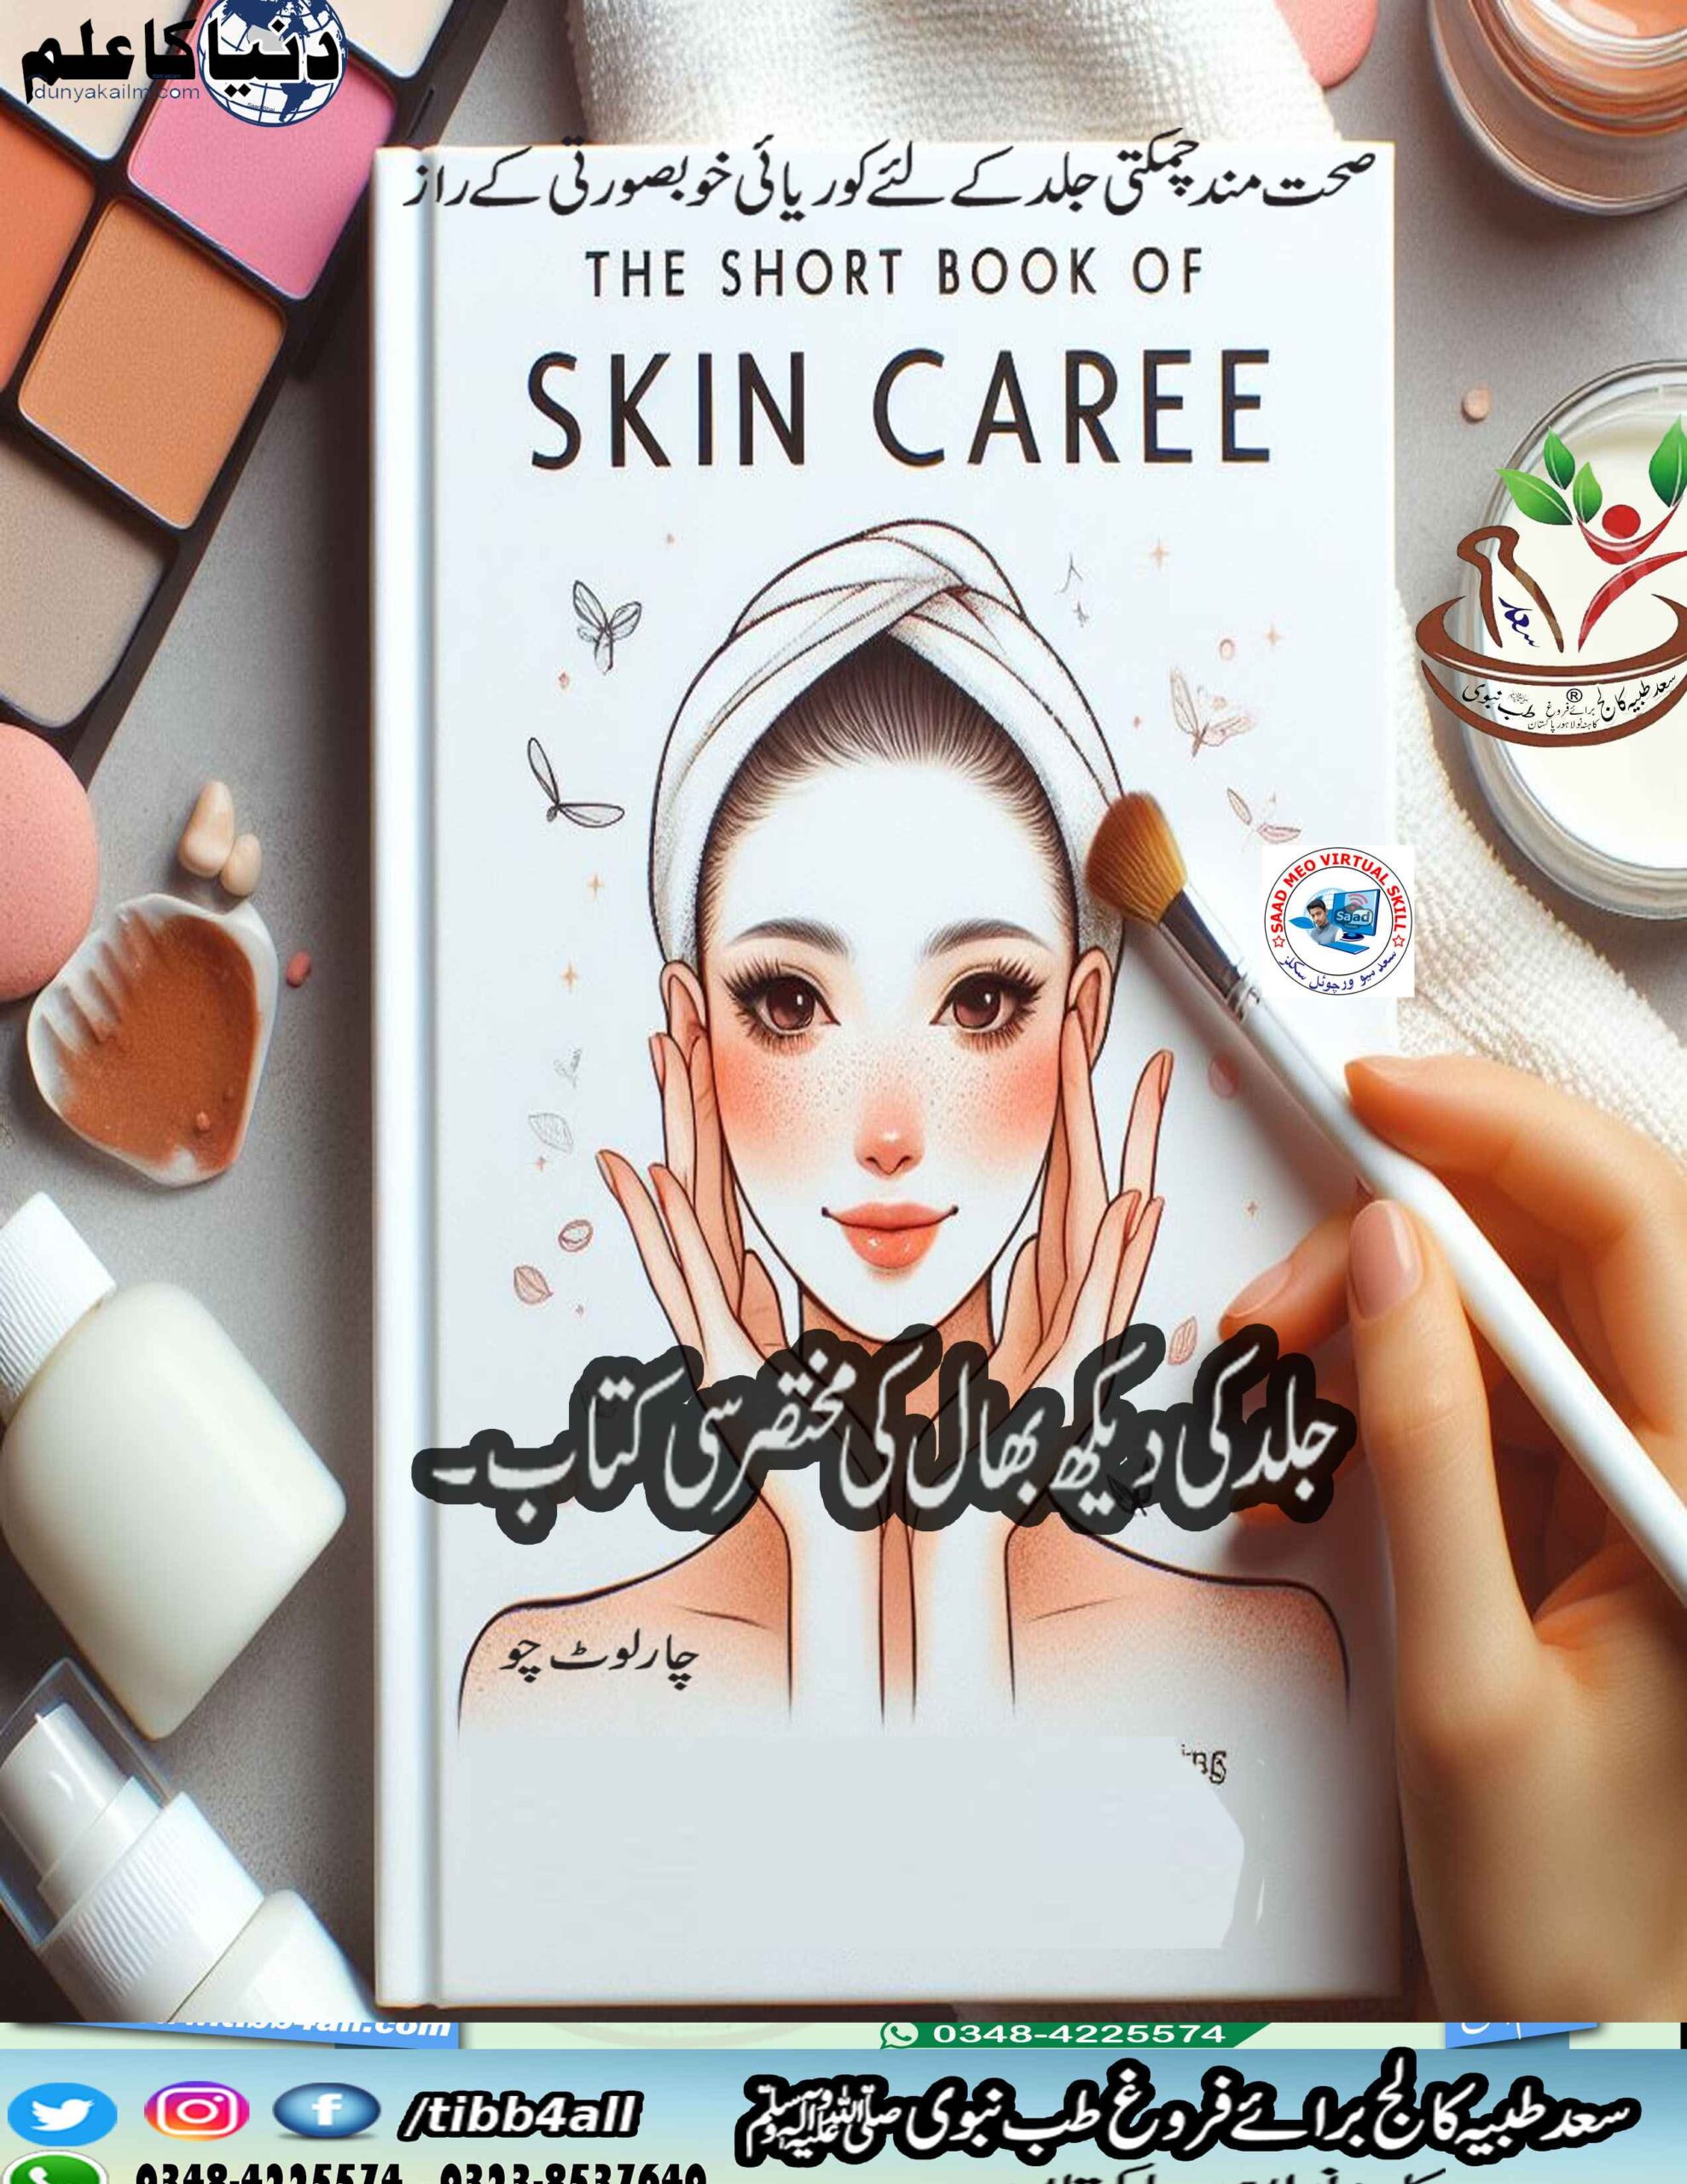 The Short Book of Skin Care